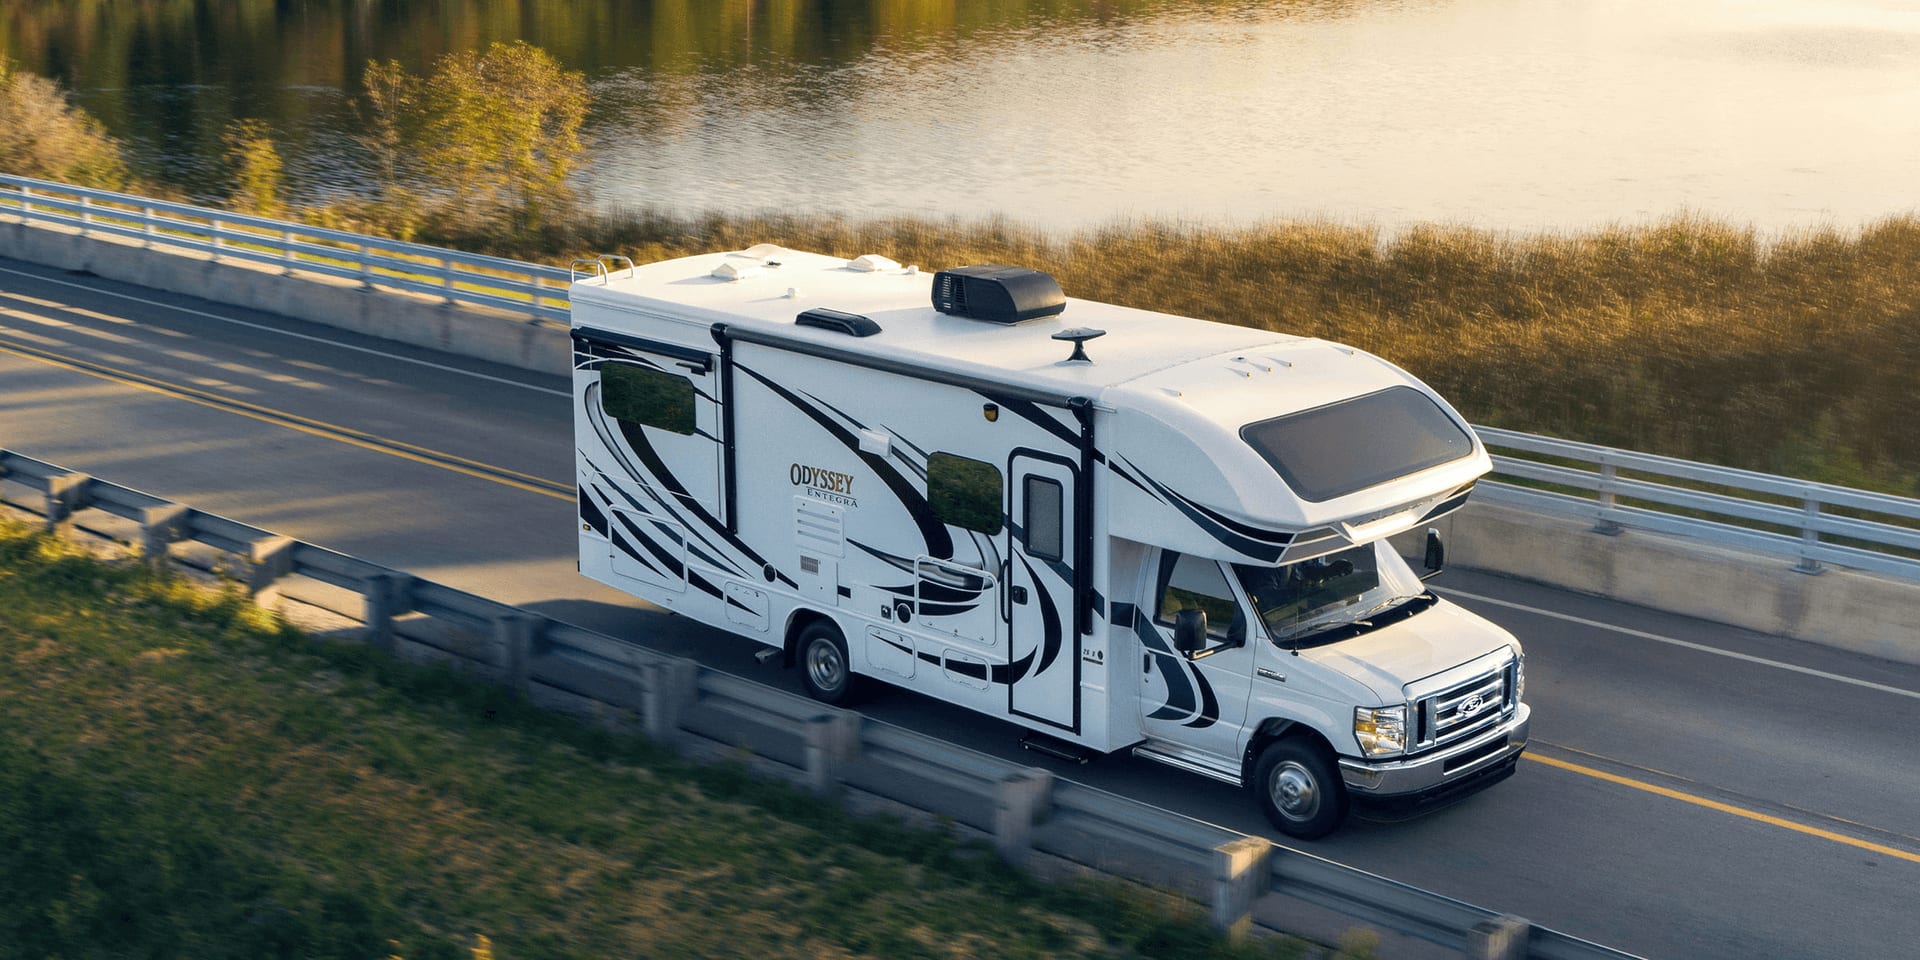 A Class C motorhome is driving past a body of water.